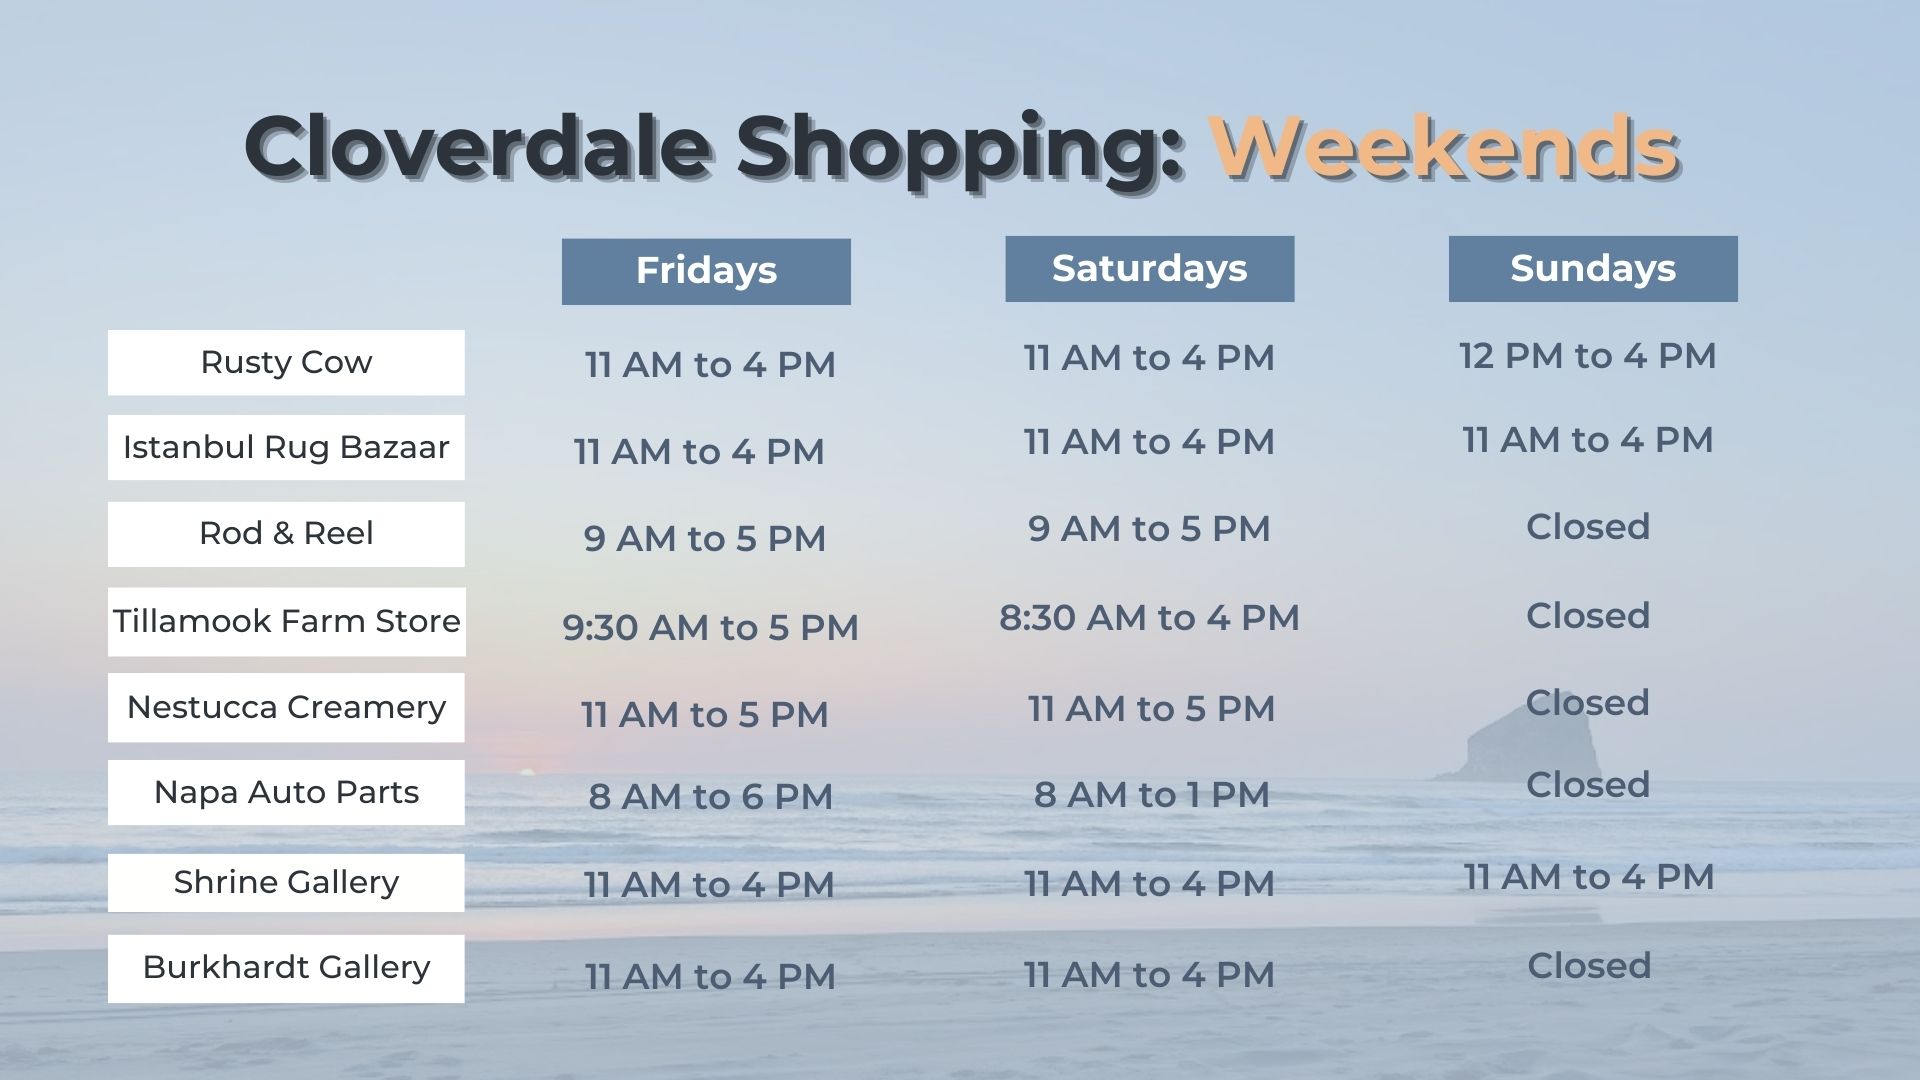 Cloverdale Weekend Shops and Hours